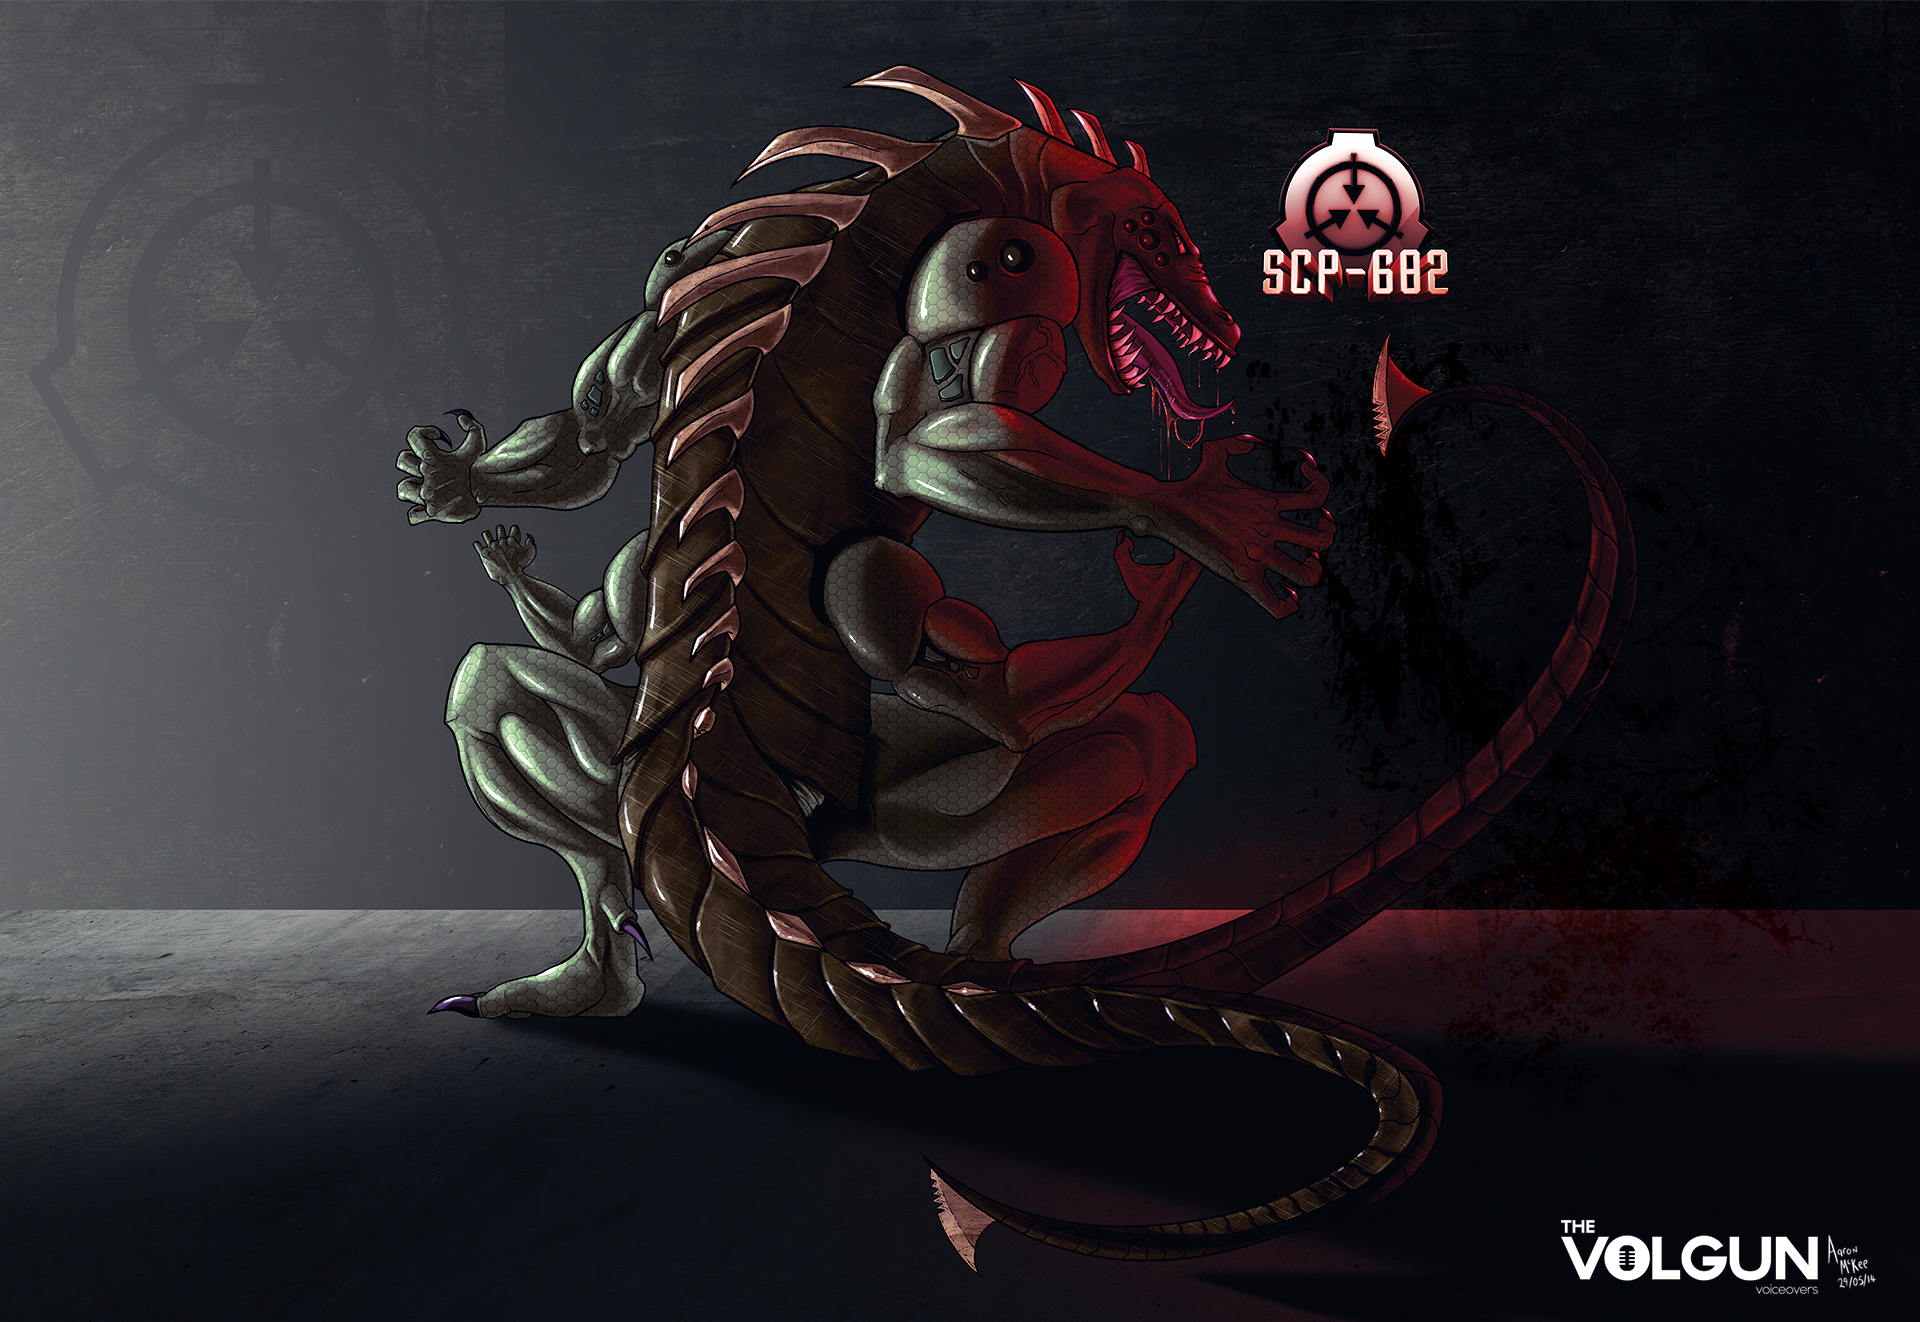 5cp-602 The Qron 29/05/1 Scp Containment Breach Darkness , HD Wallpaper & Backgrounds